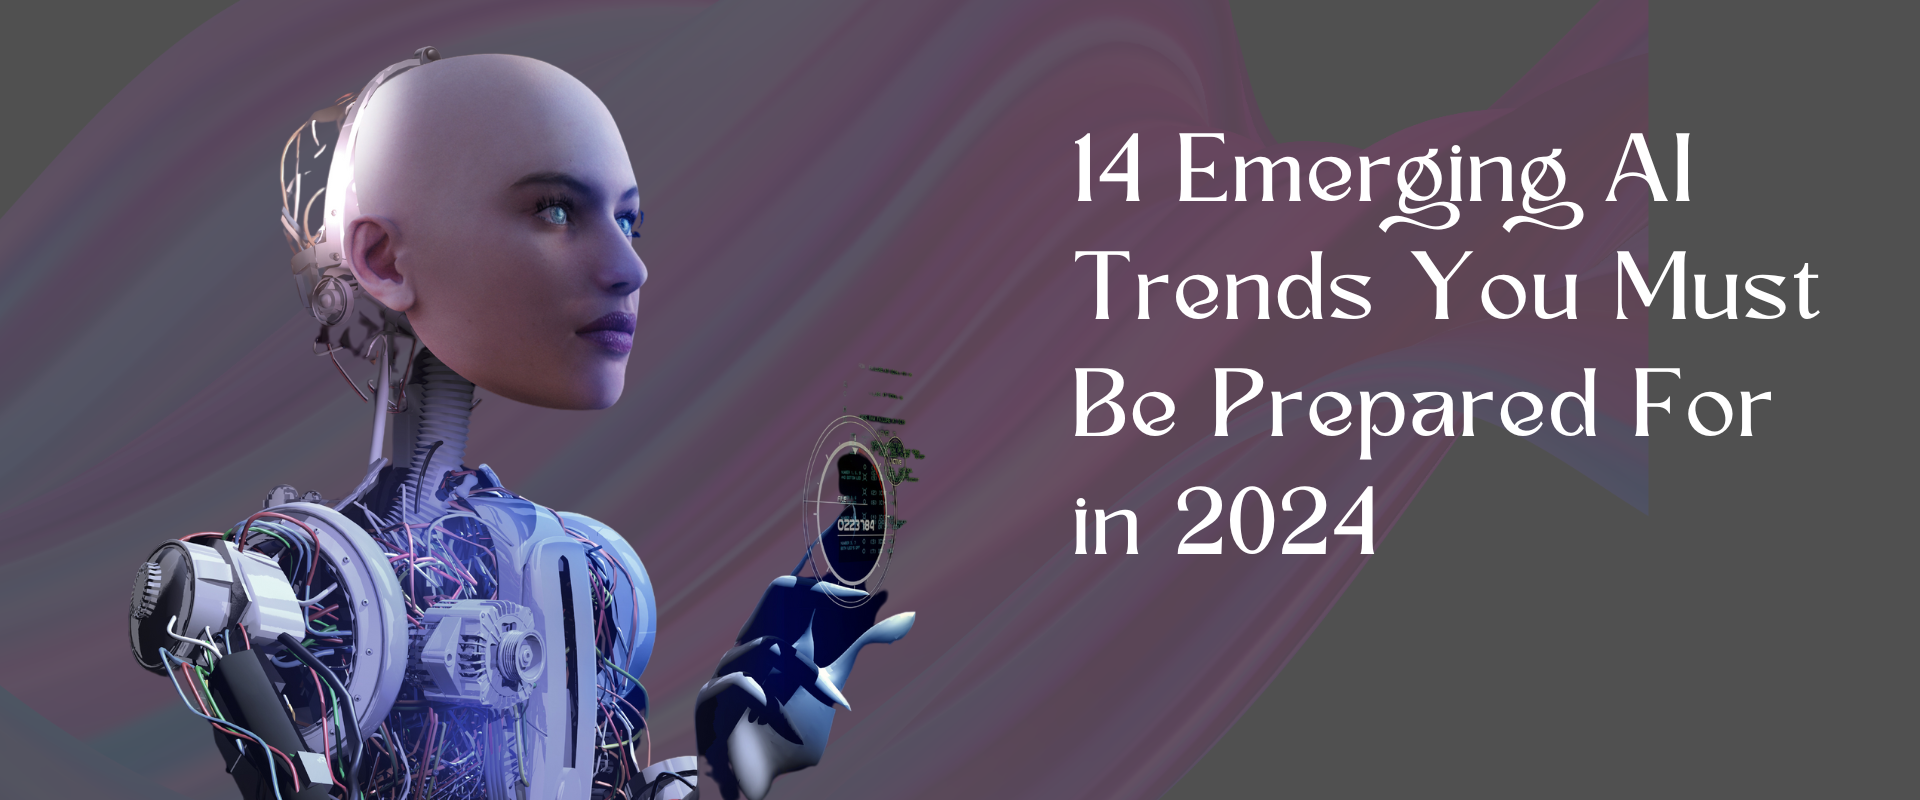 14 Emerging AI Trends You Must Be Prepared For in 2024